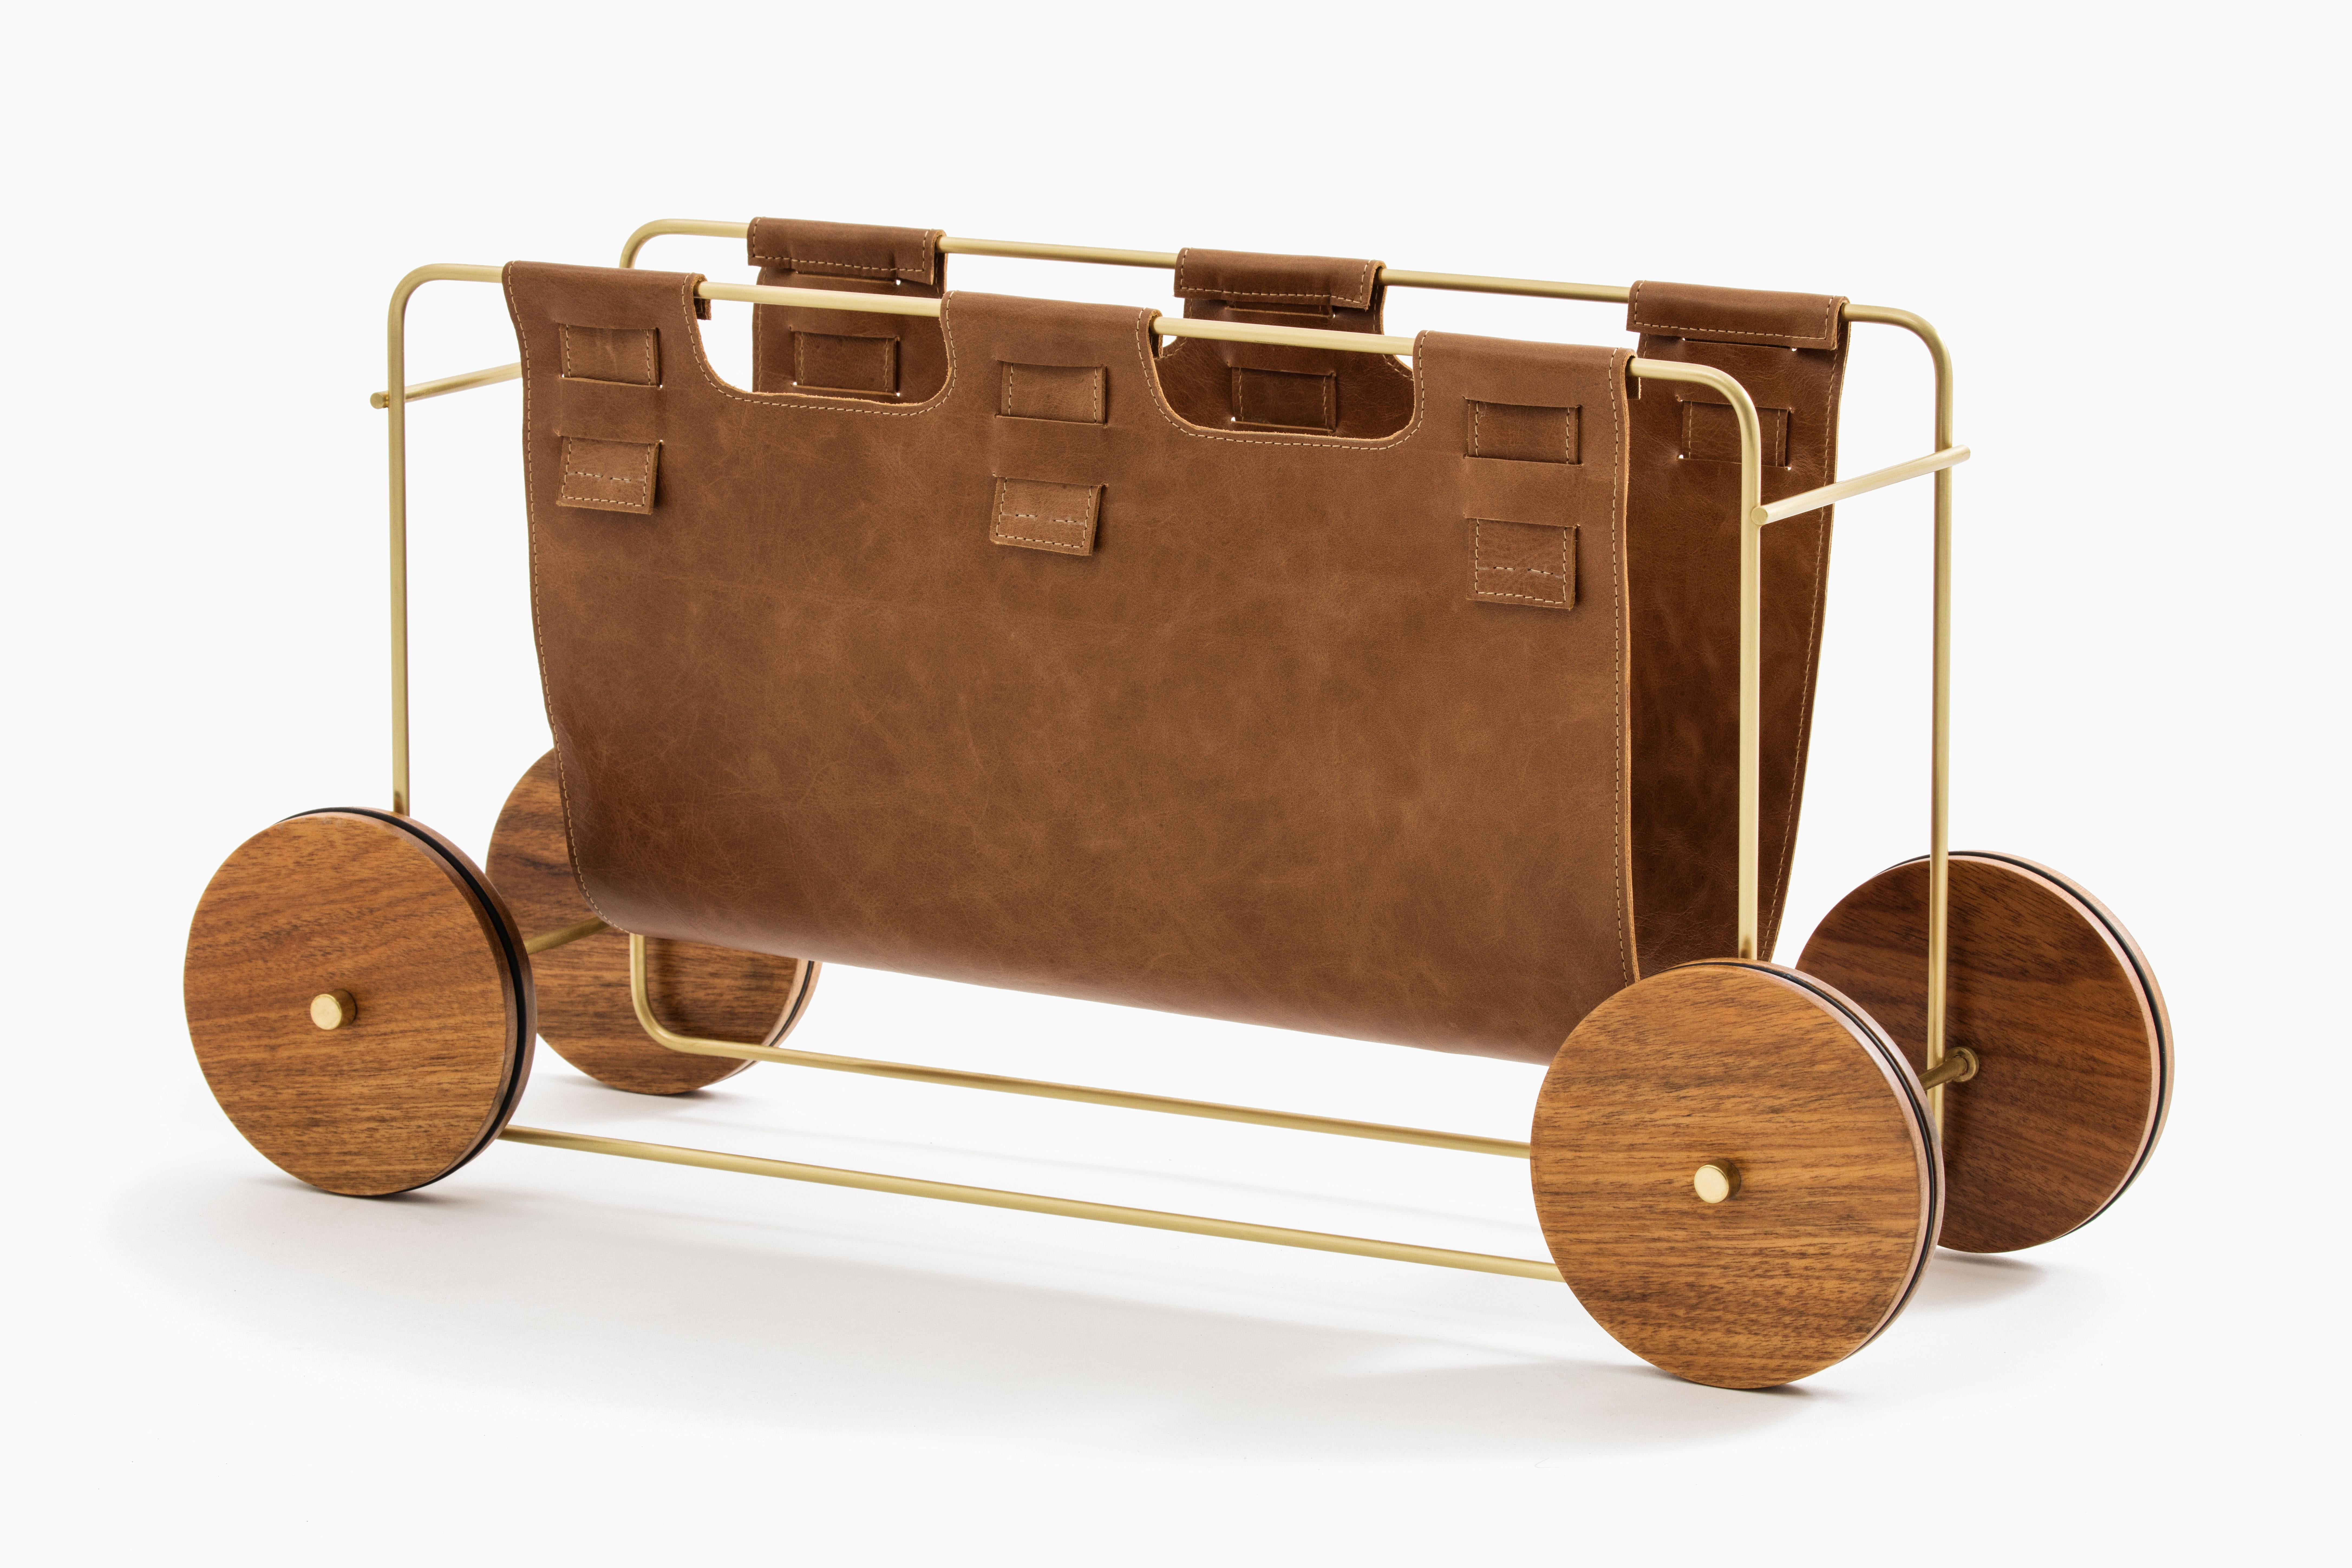 Inspired in the bullock cart (cart used in the past in rural areas), the work piece also counts on large wooden wheels, its structure can be in brass, stainless steel or black carbon steel powder coating and the leather bag adds the final touch.